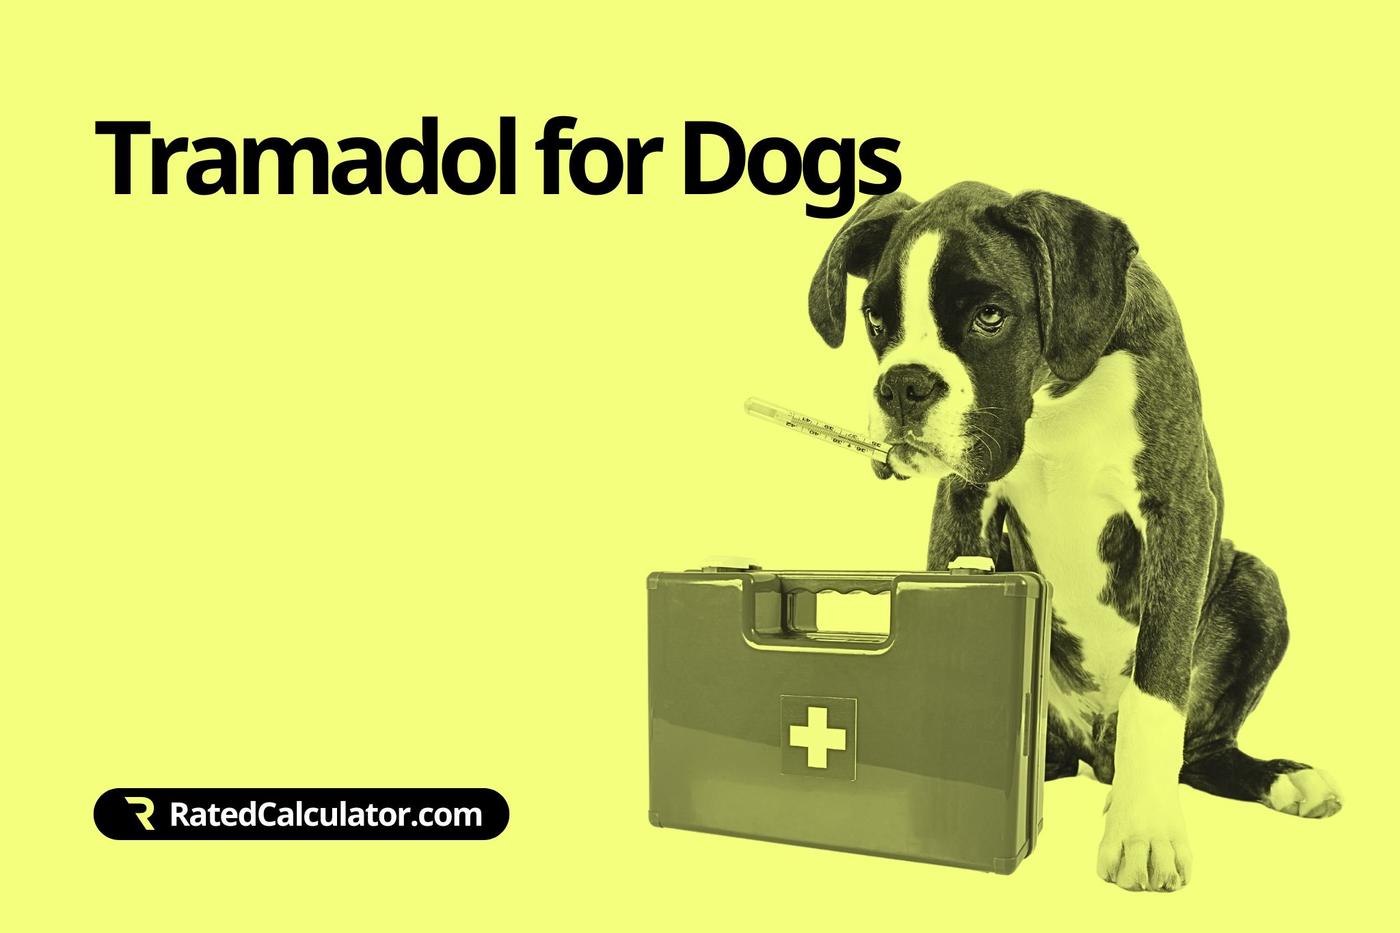 How to use the Tramadol for Dogs Calculator